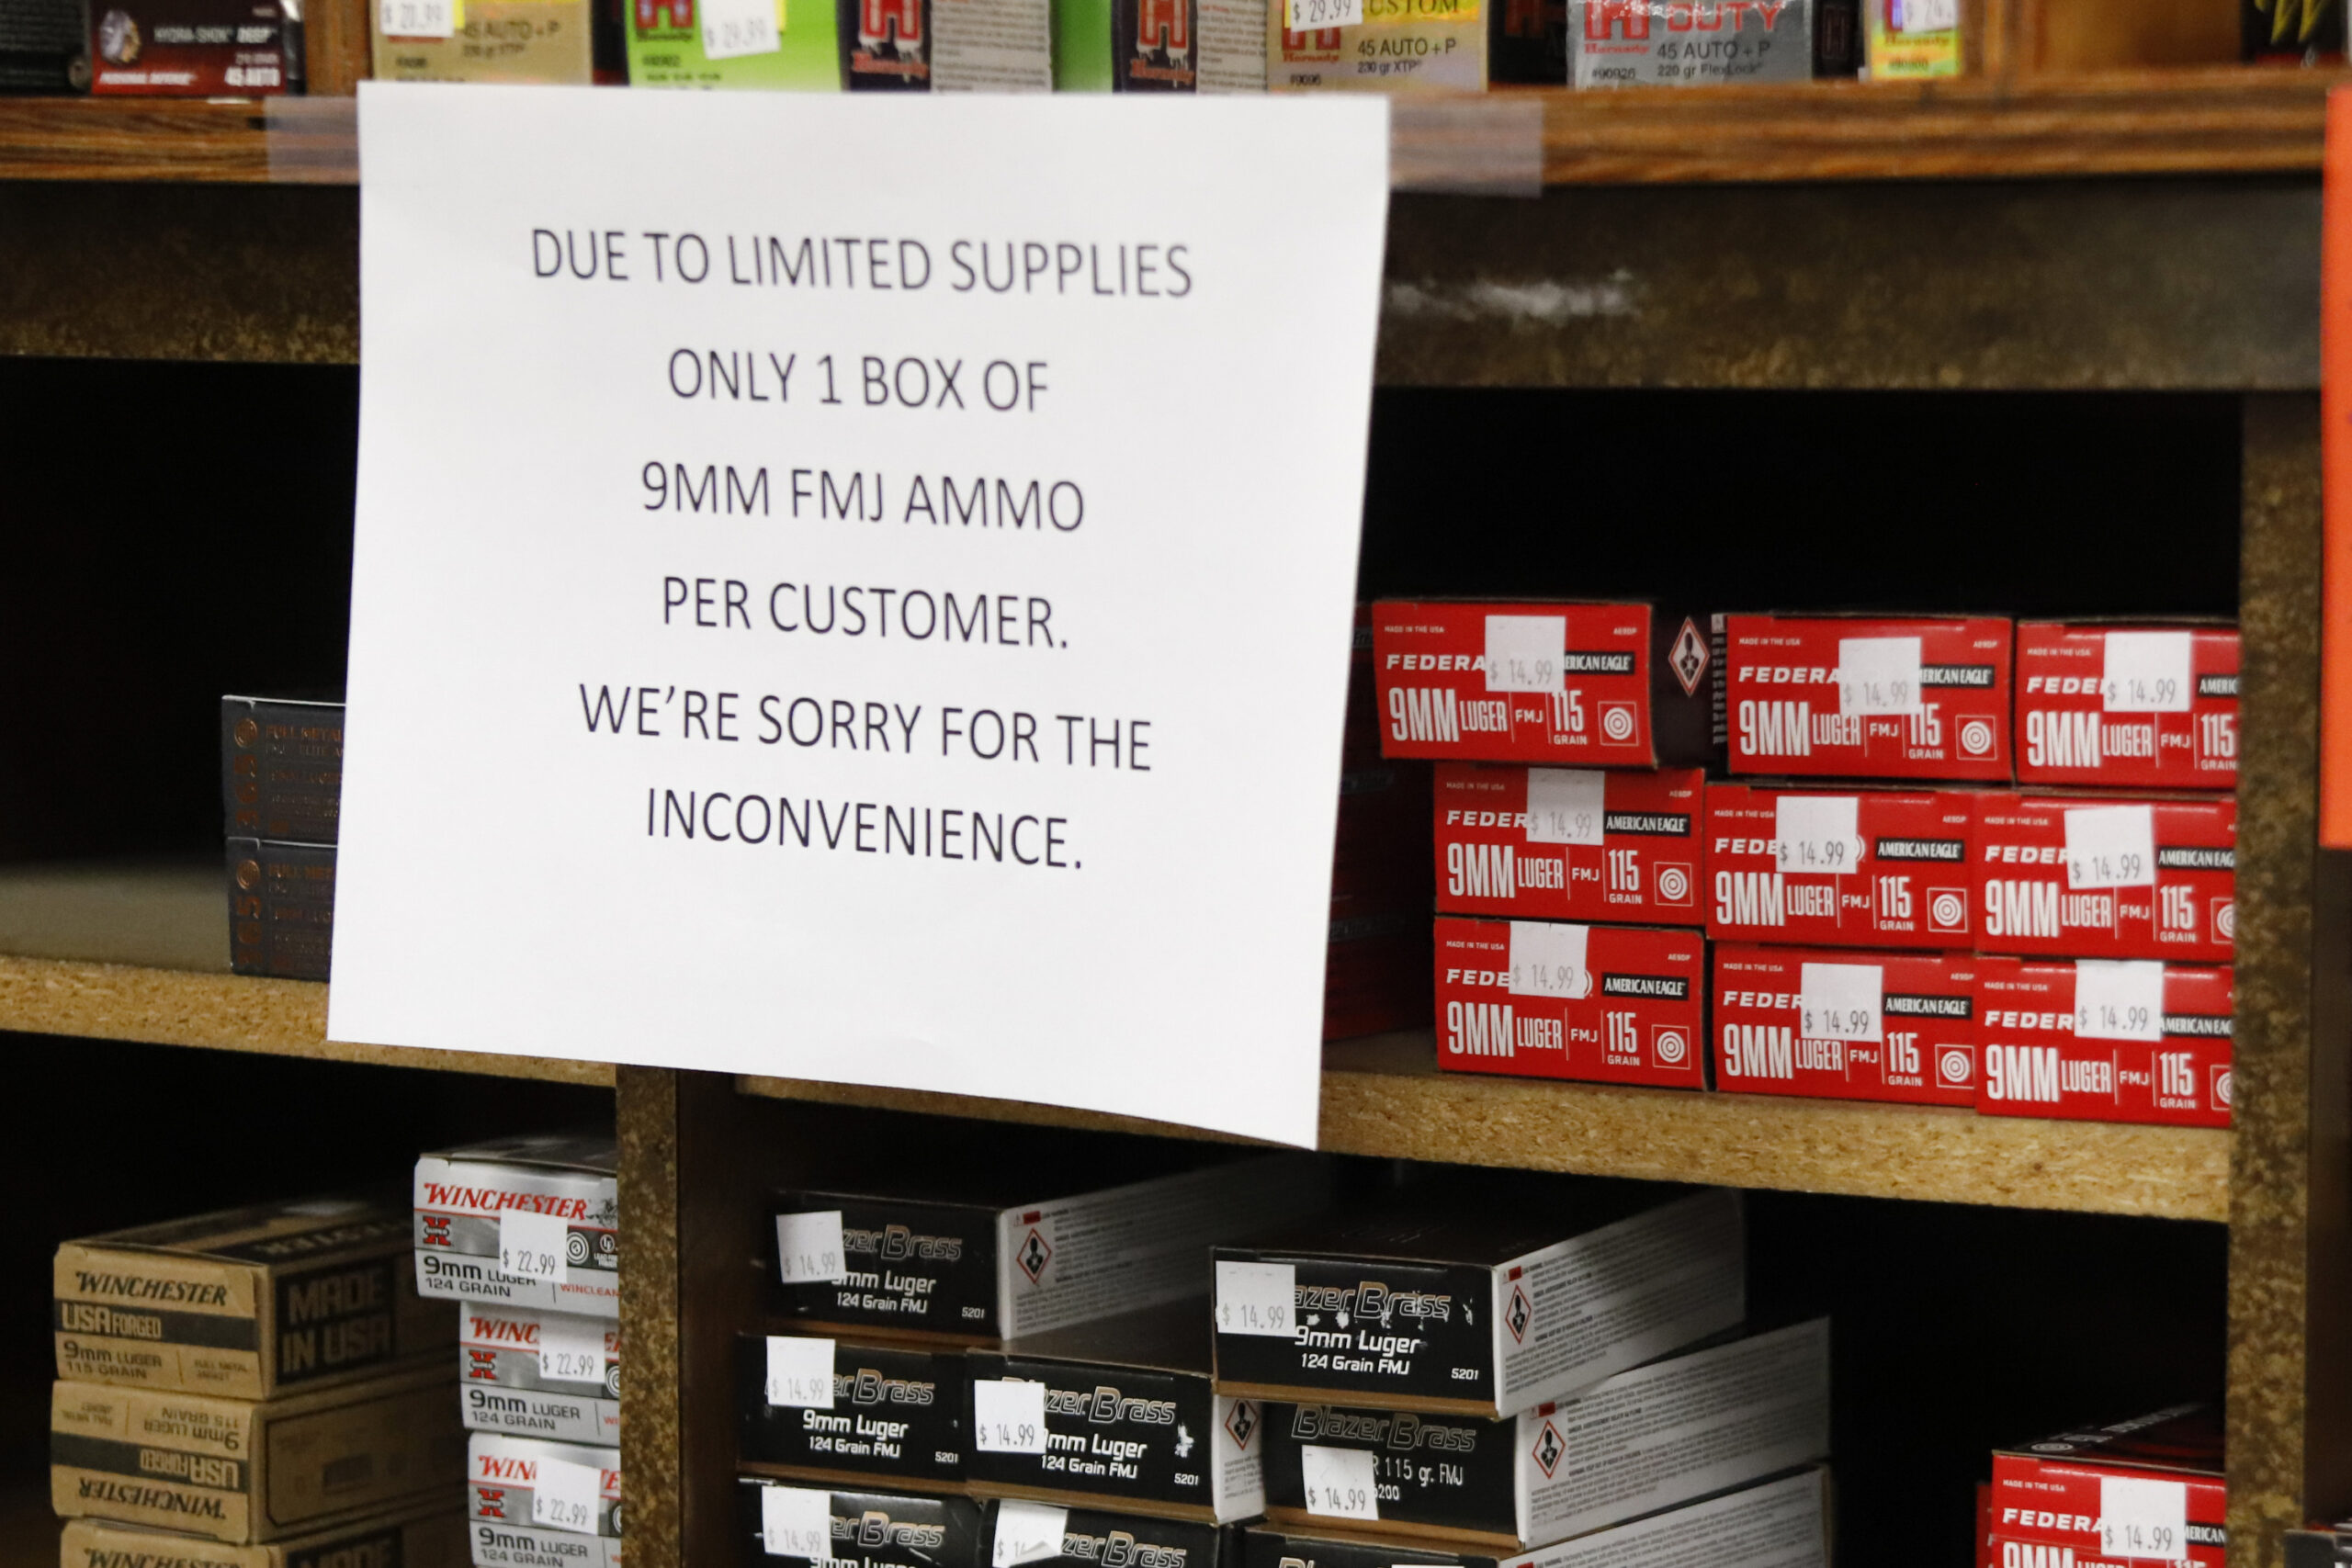 Wisconsin Demand For Guns, Ammo Hasn’t Subsided Since Start Of COVID-19 Pandemic